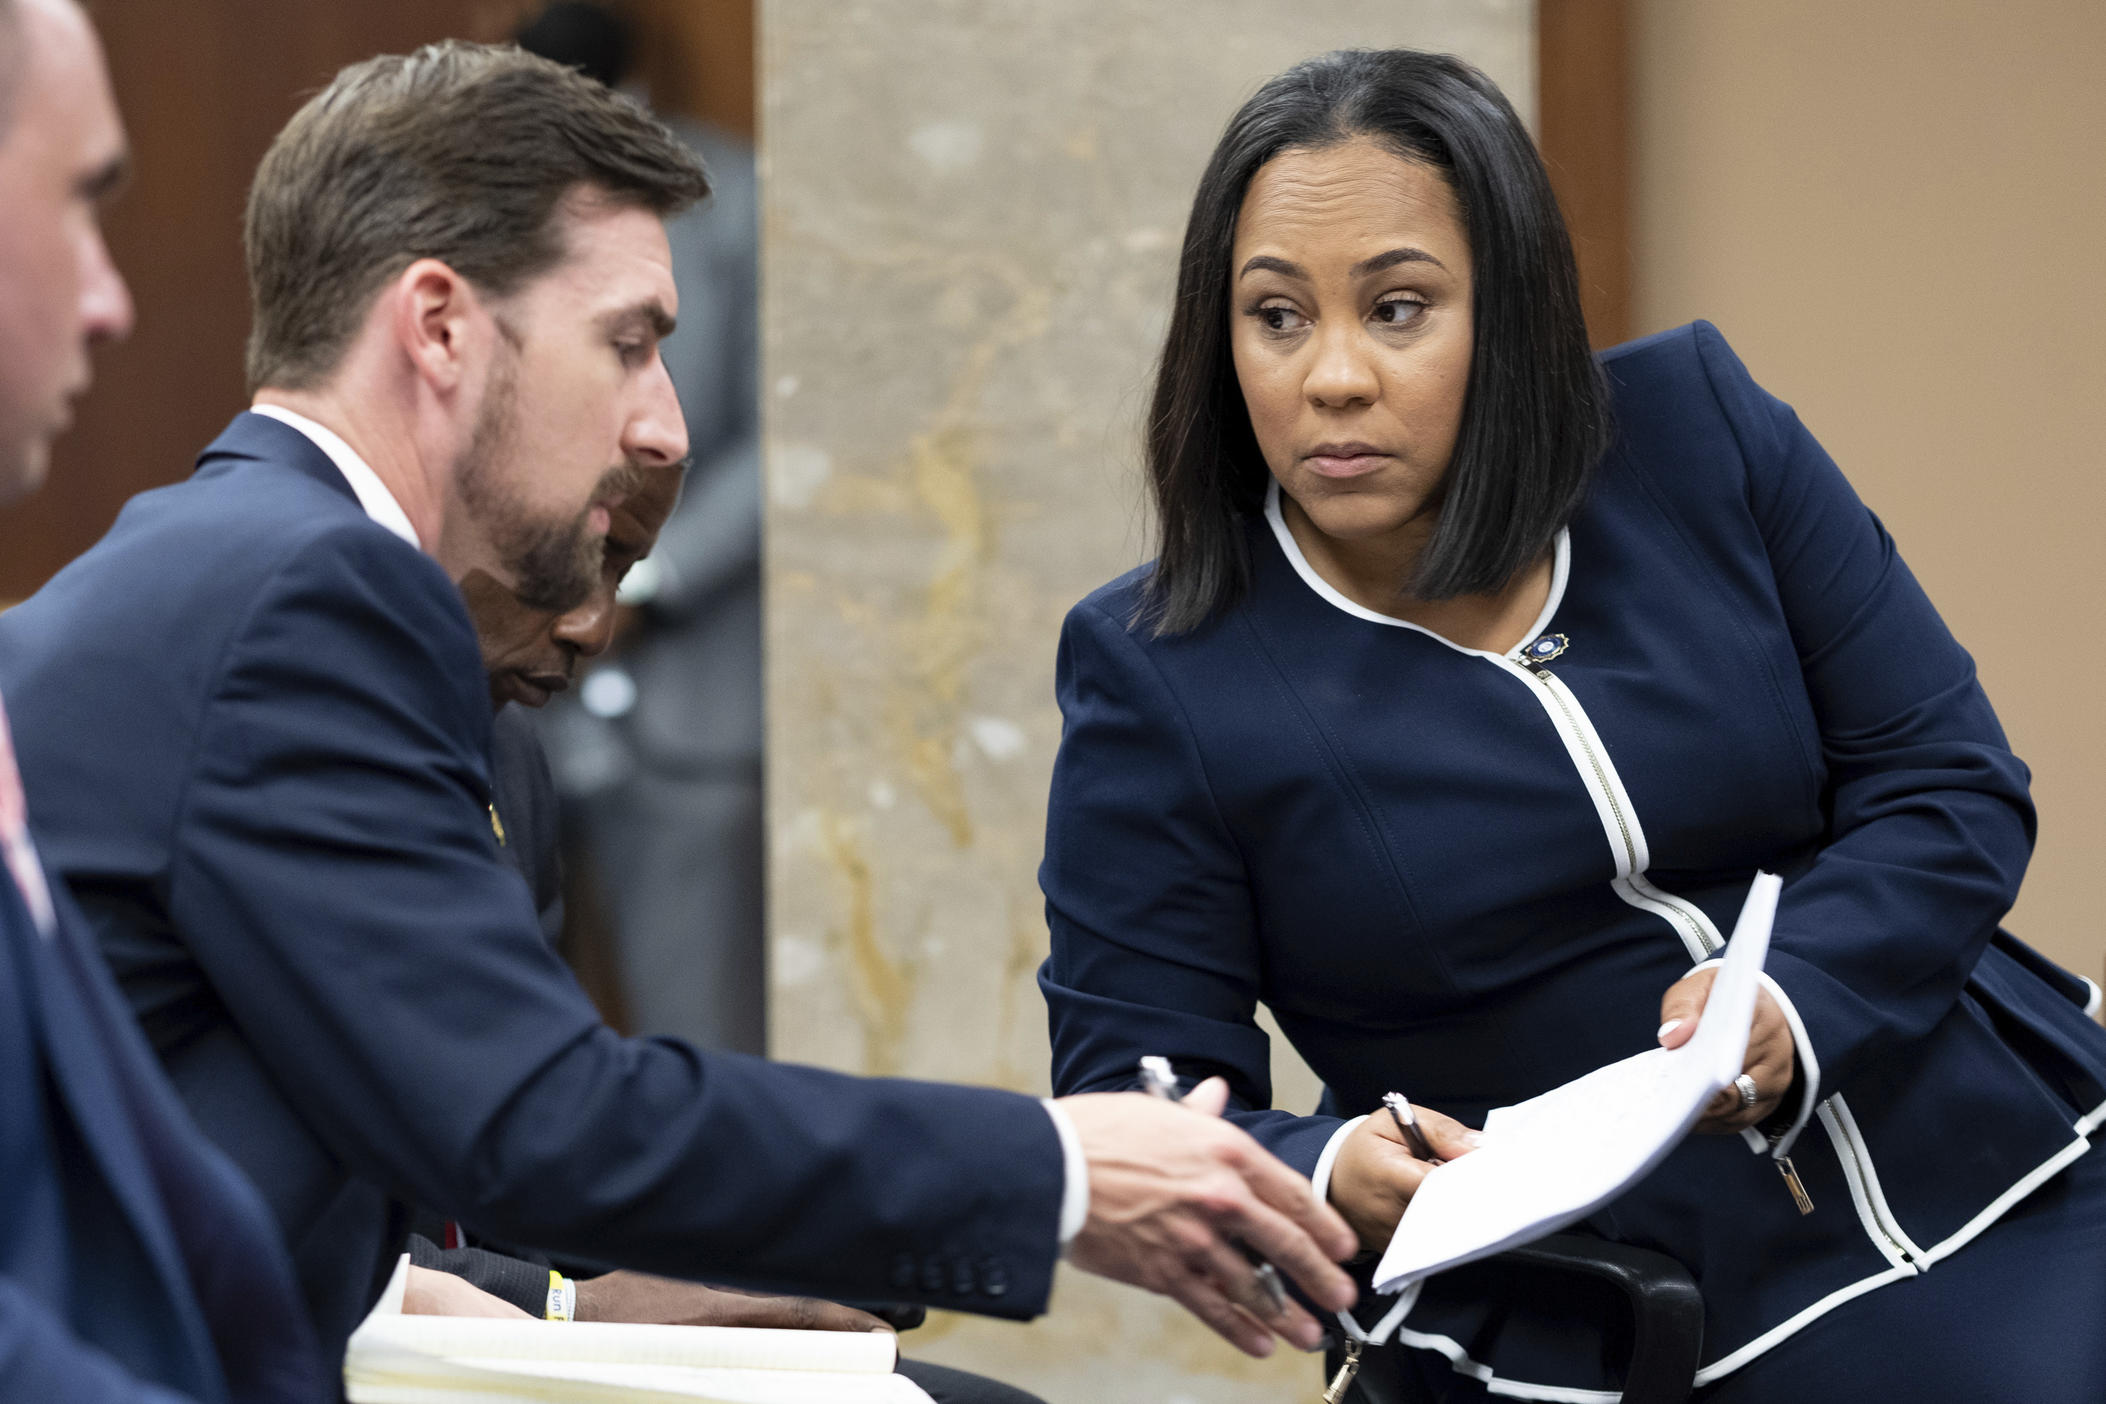 Fulton County District Attorney Fani Willis, right, talks with a member of her team during proceedings to seat a special purpose grand jury in Fulton County, Ga.